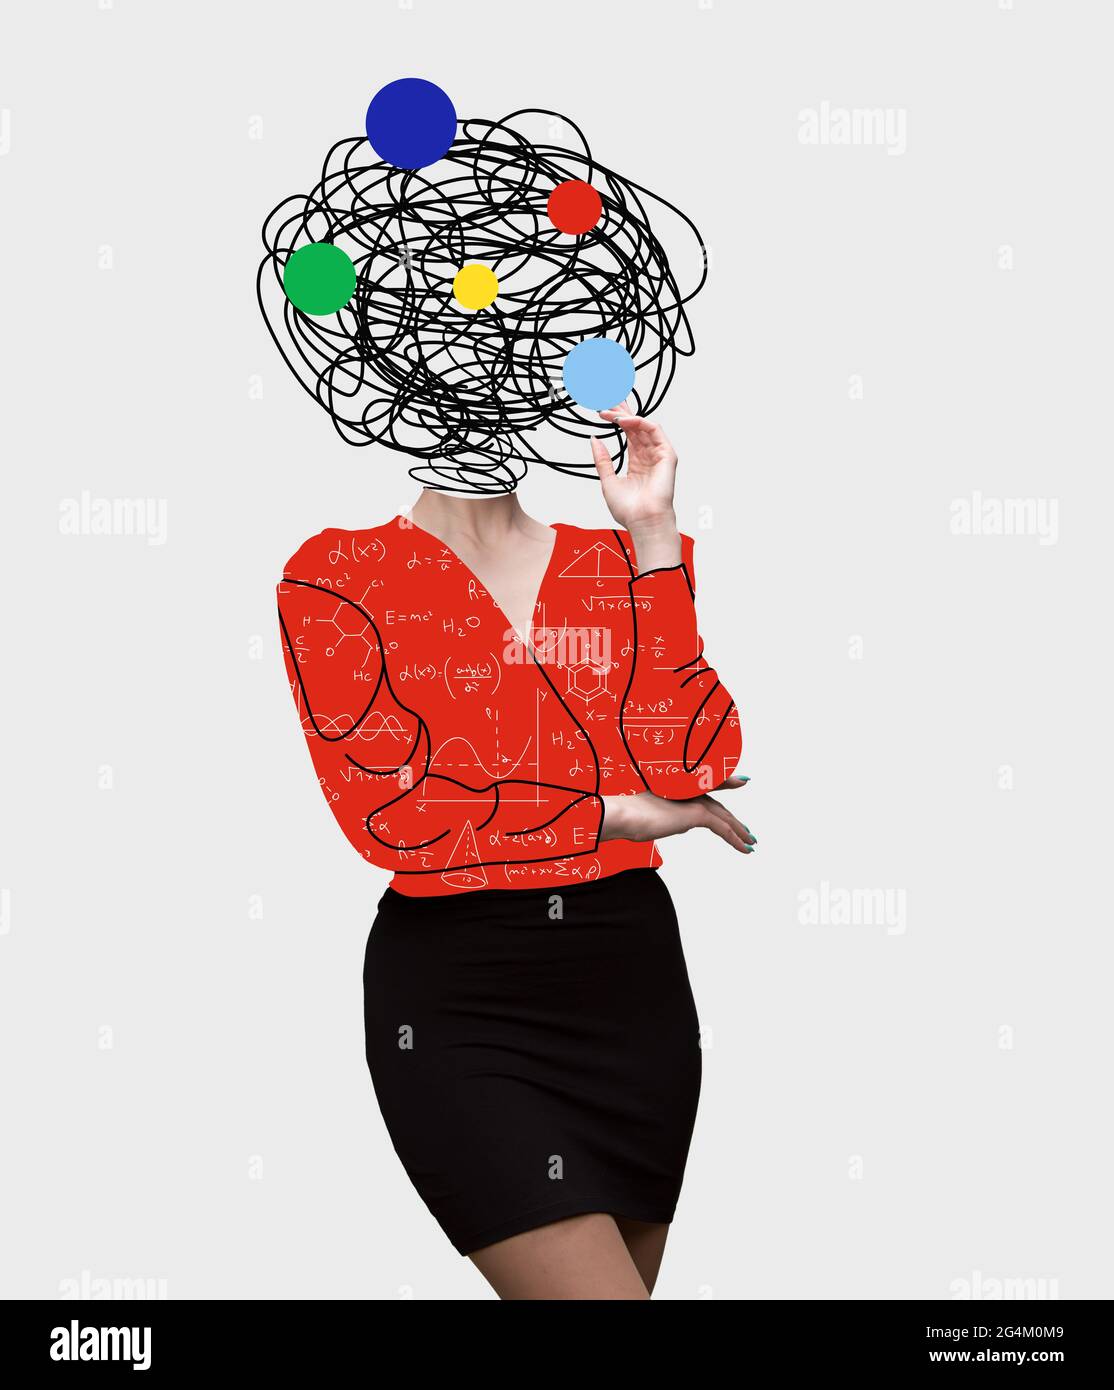 Chaos in woman's head and hurricane of thoughts. Modern design, contemporary art collage. Inspiration, idea, trendy urban magazine style. Line art Stock Photo